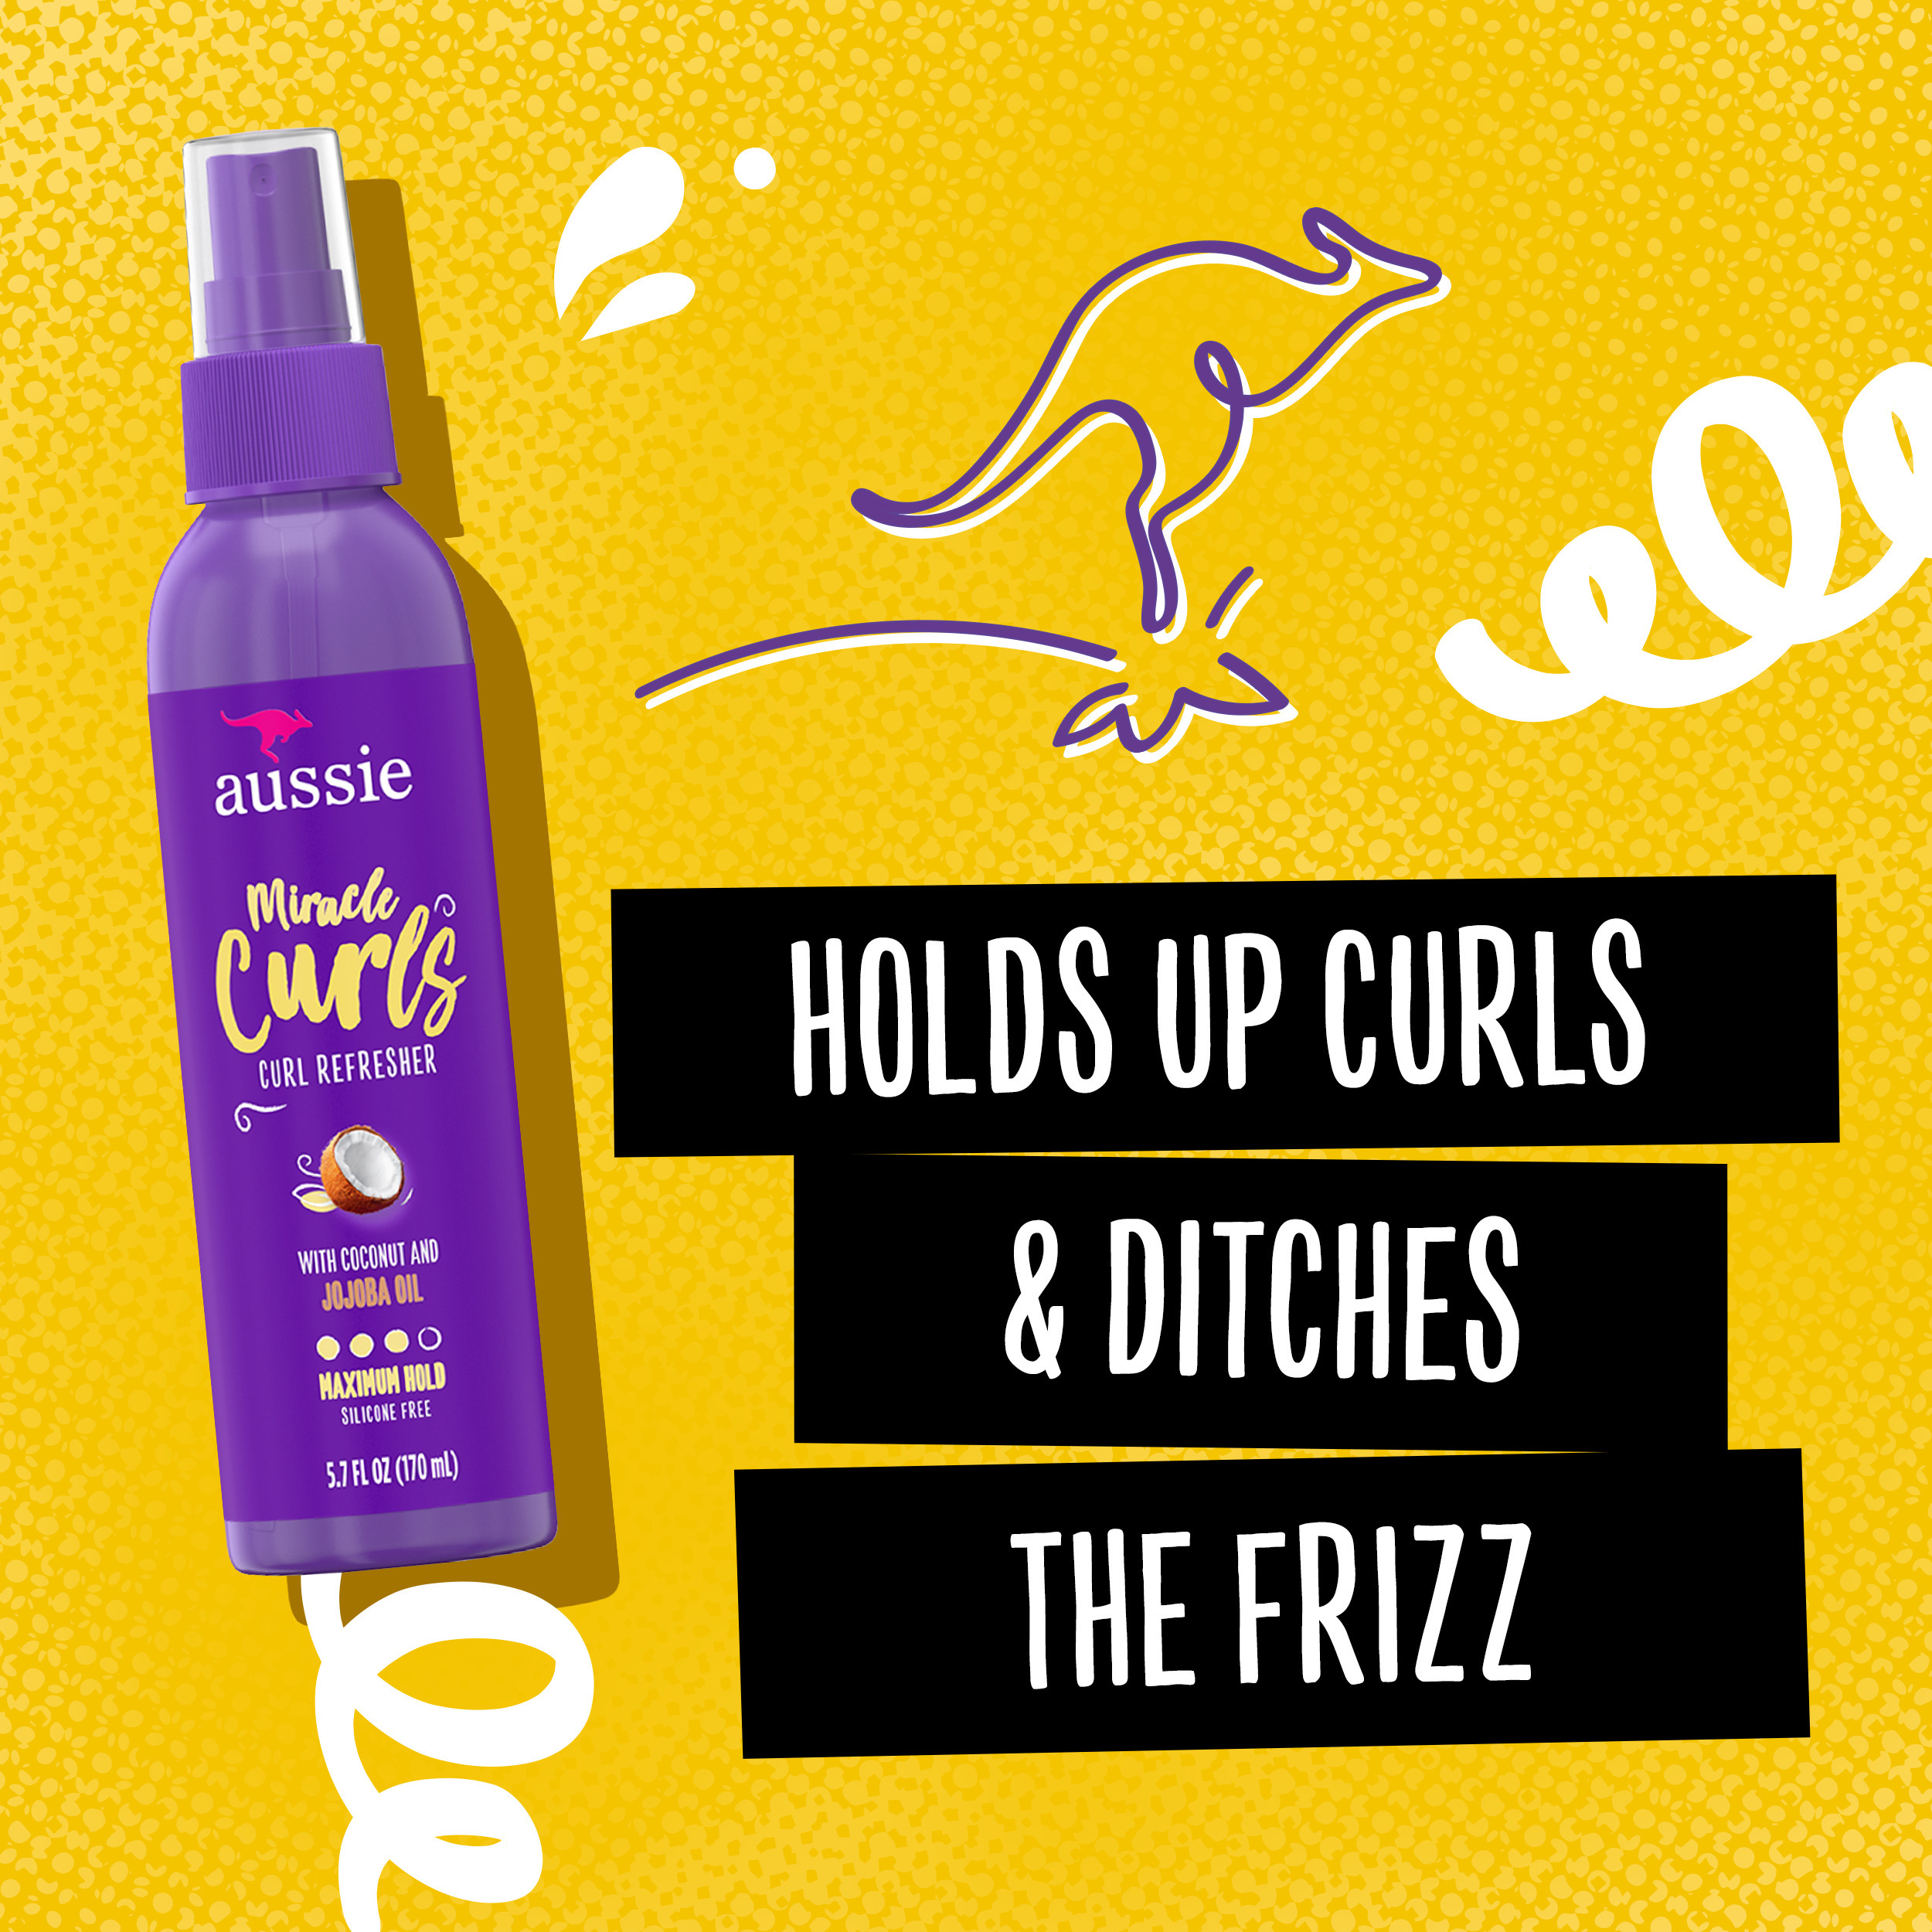 Aussie Miracle Curls Curl Refresher Spray Gel, Max Hold, for All Hair Types 5.7 fl oz - image 4 of 10